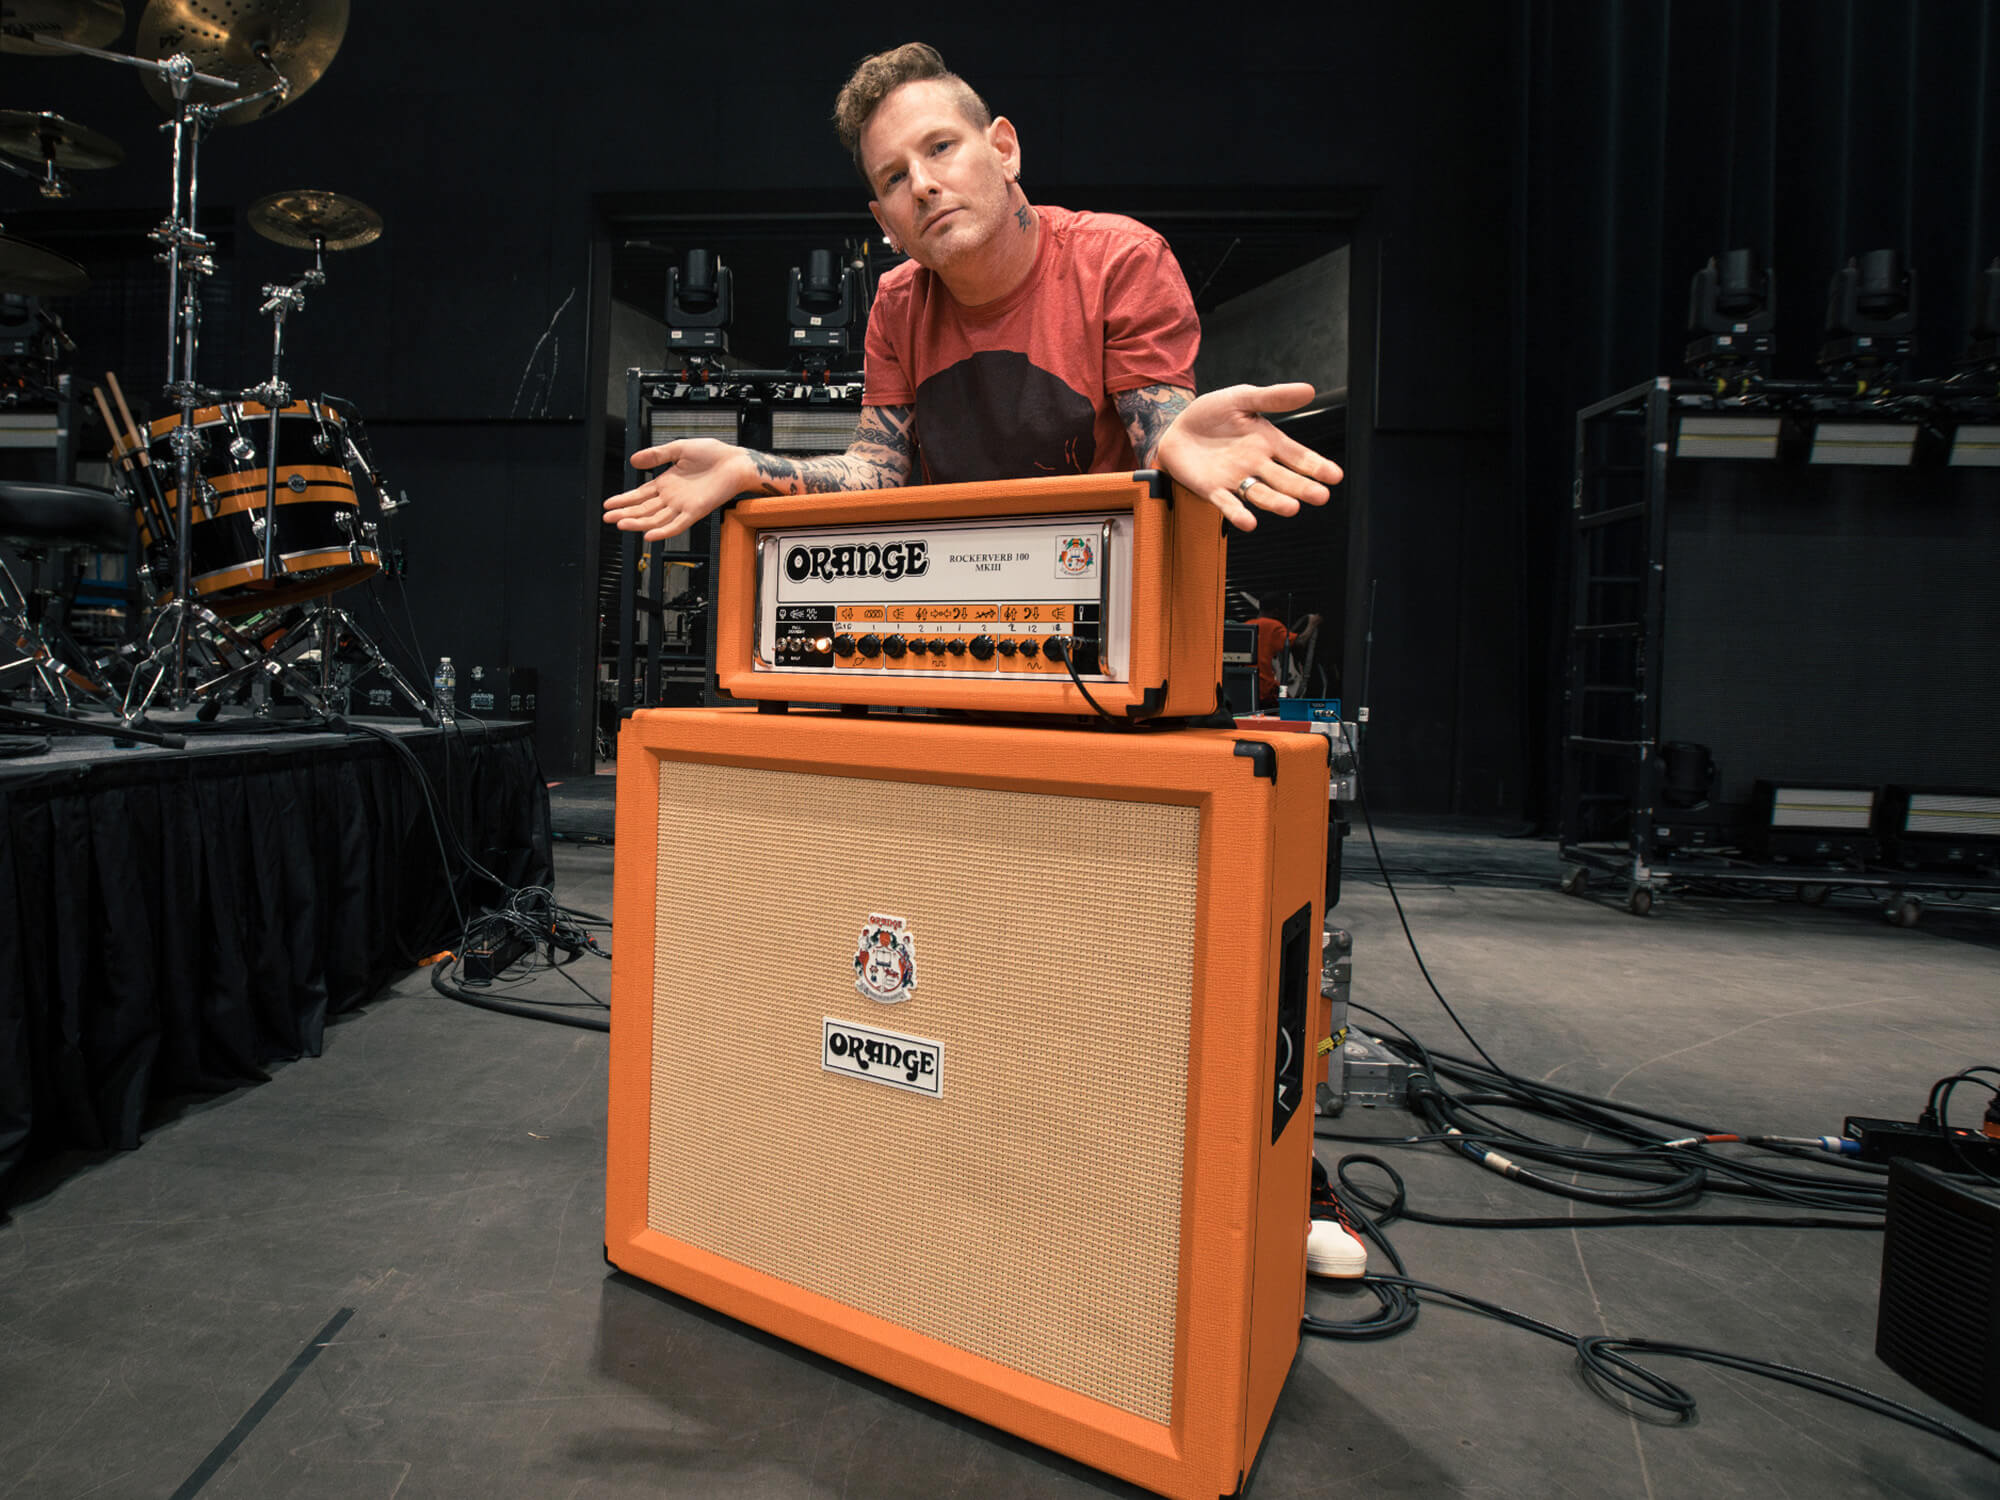 Corey Taylor leaning on his Orange amp head and cabinet